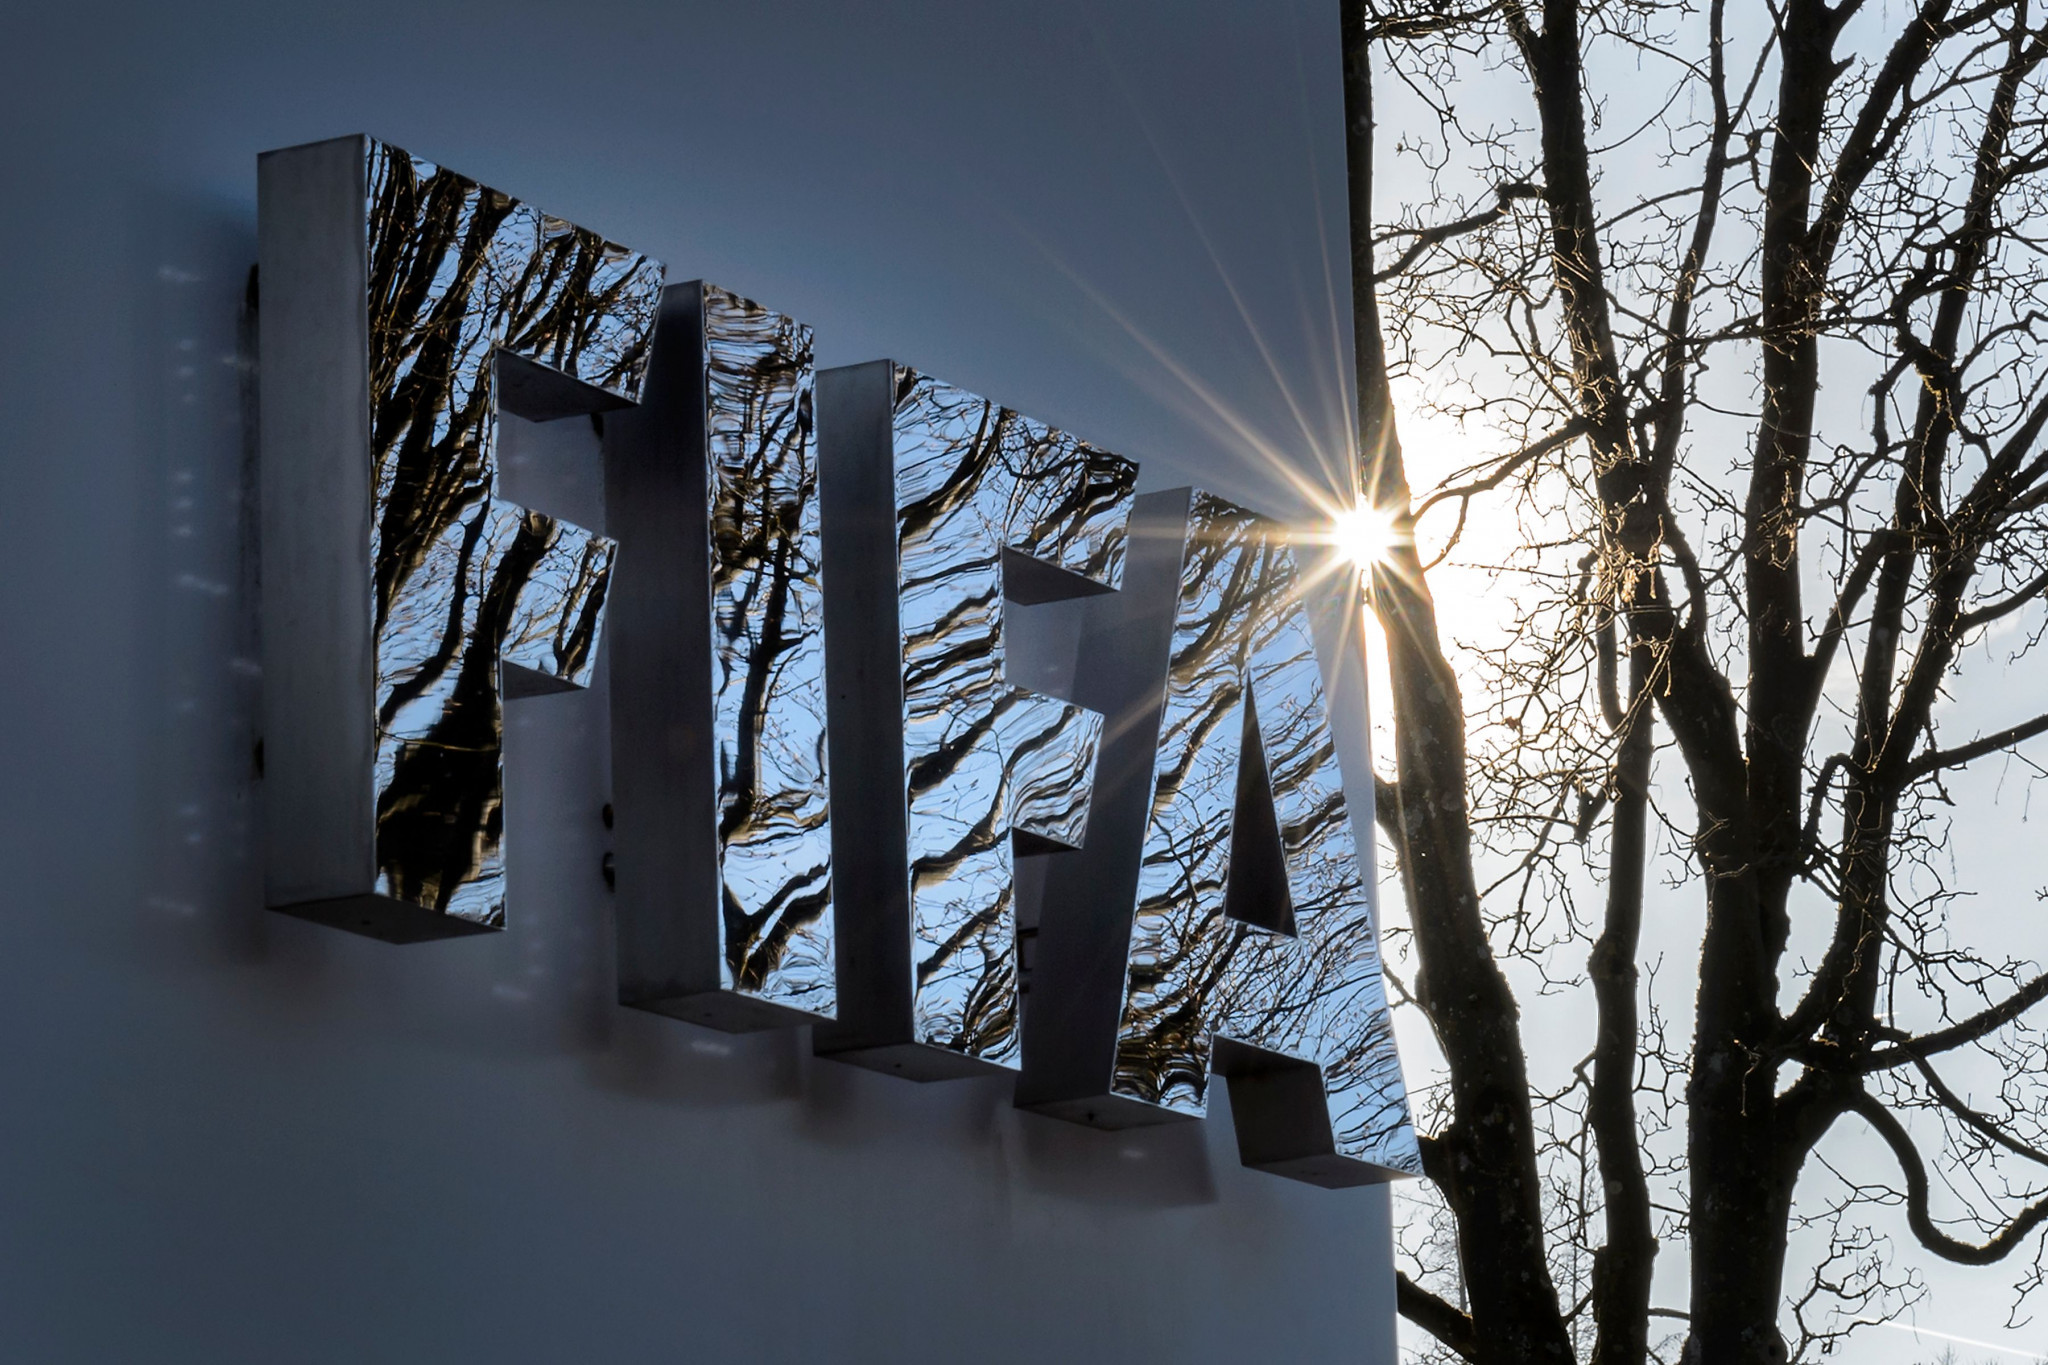 Youth coach suspended by FIFA Ethics Committee after sexual abuse allegations